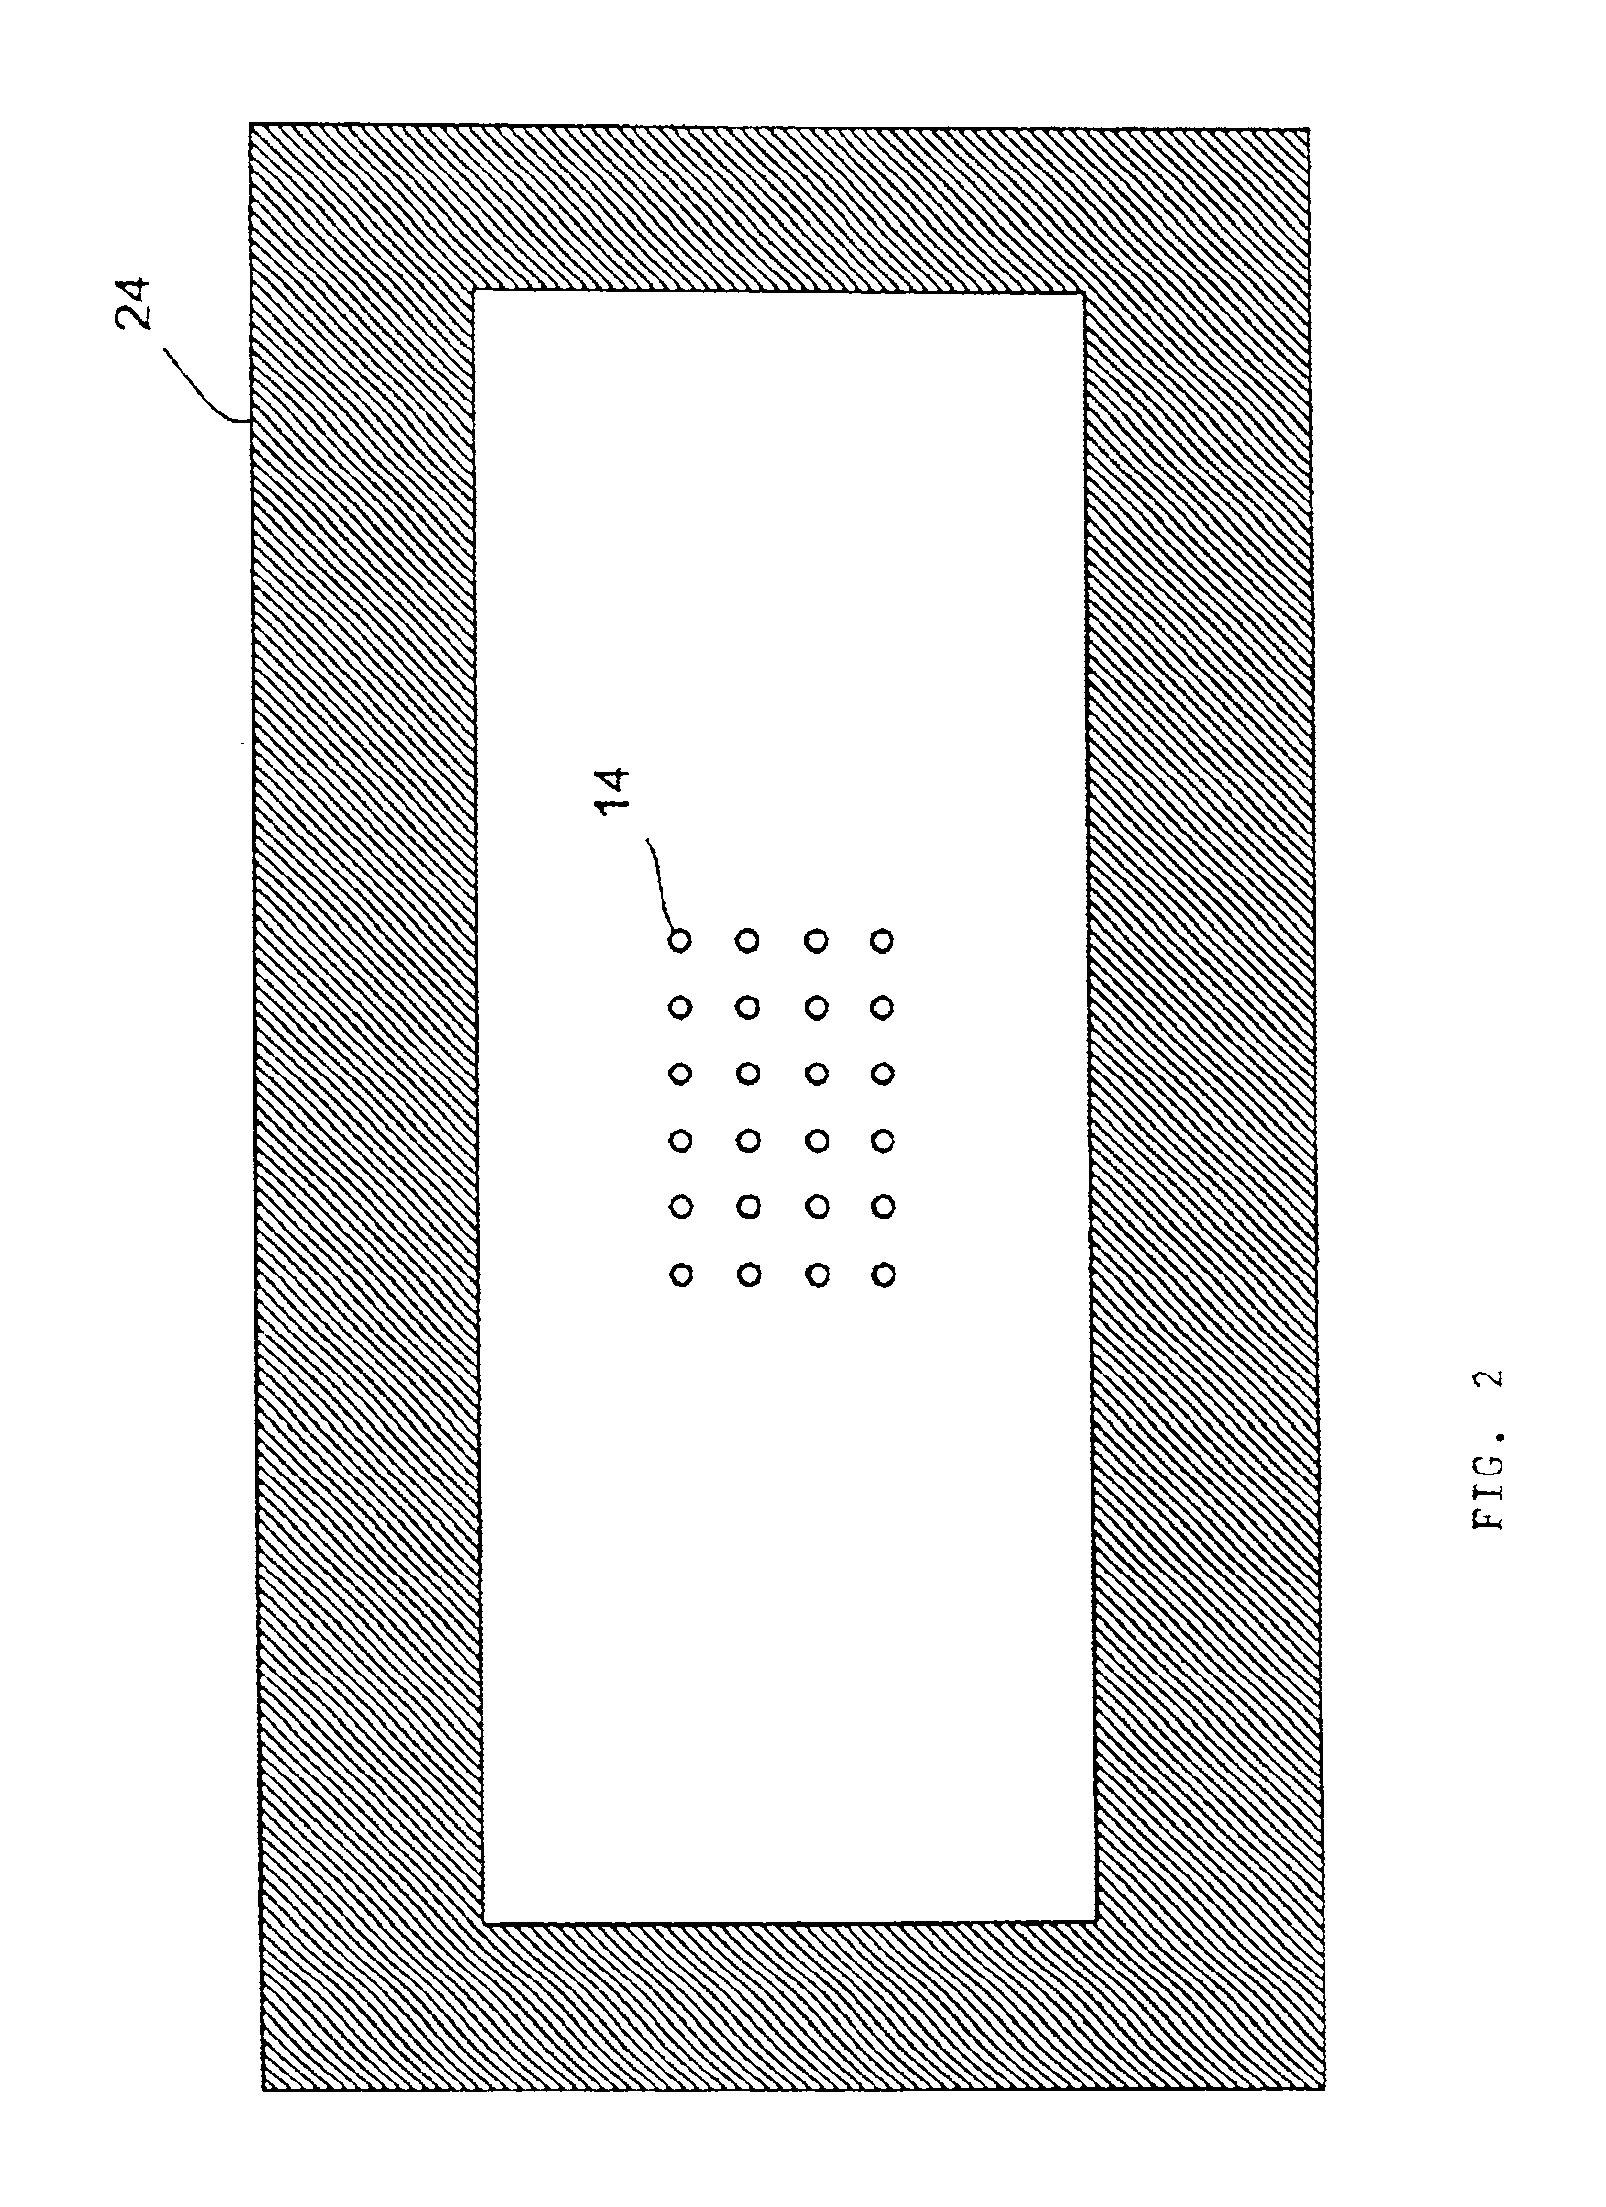 Fluids manipulation device with format conversion